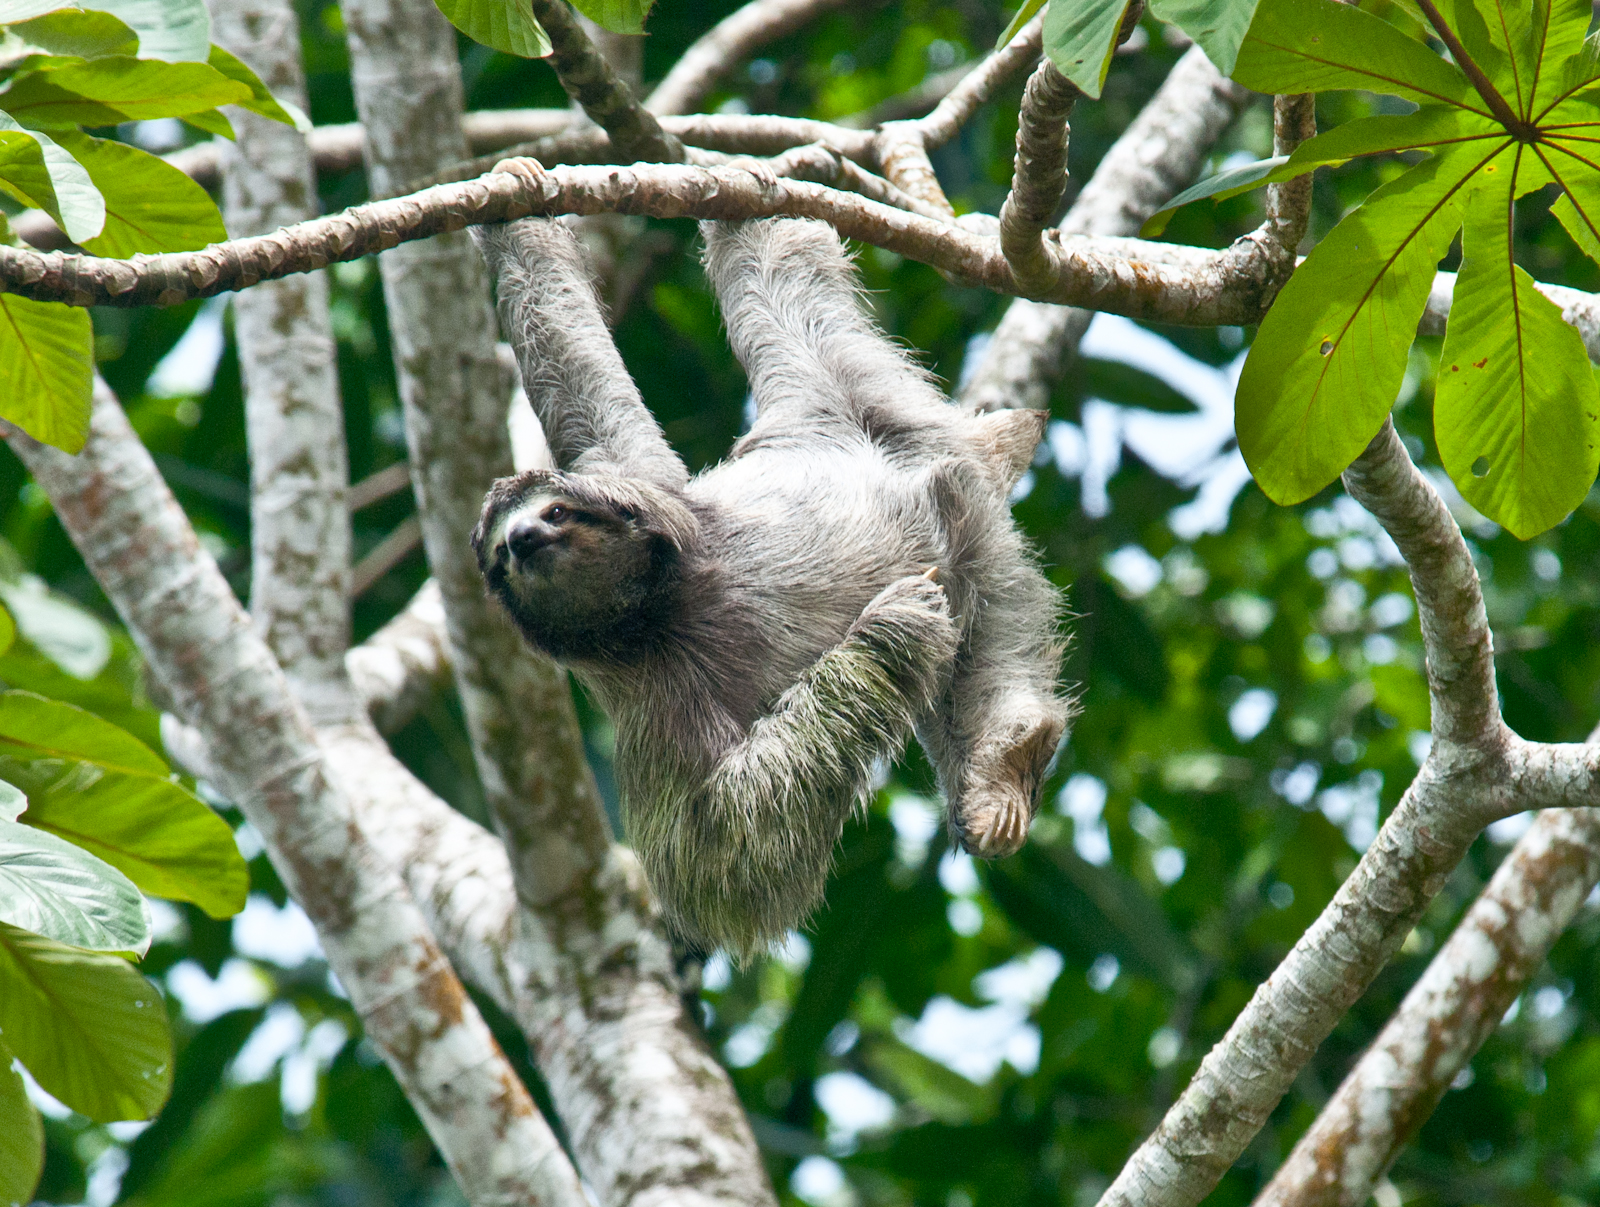 a sloth hanging upside down in a tree